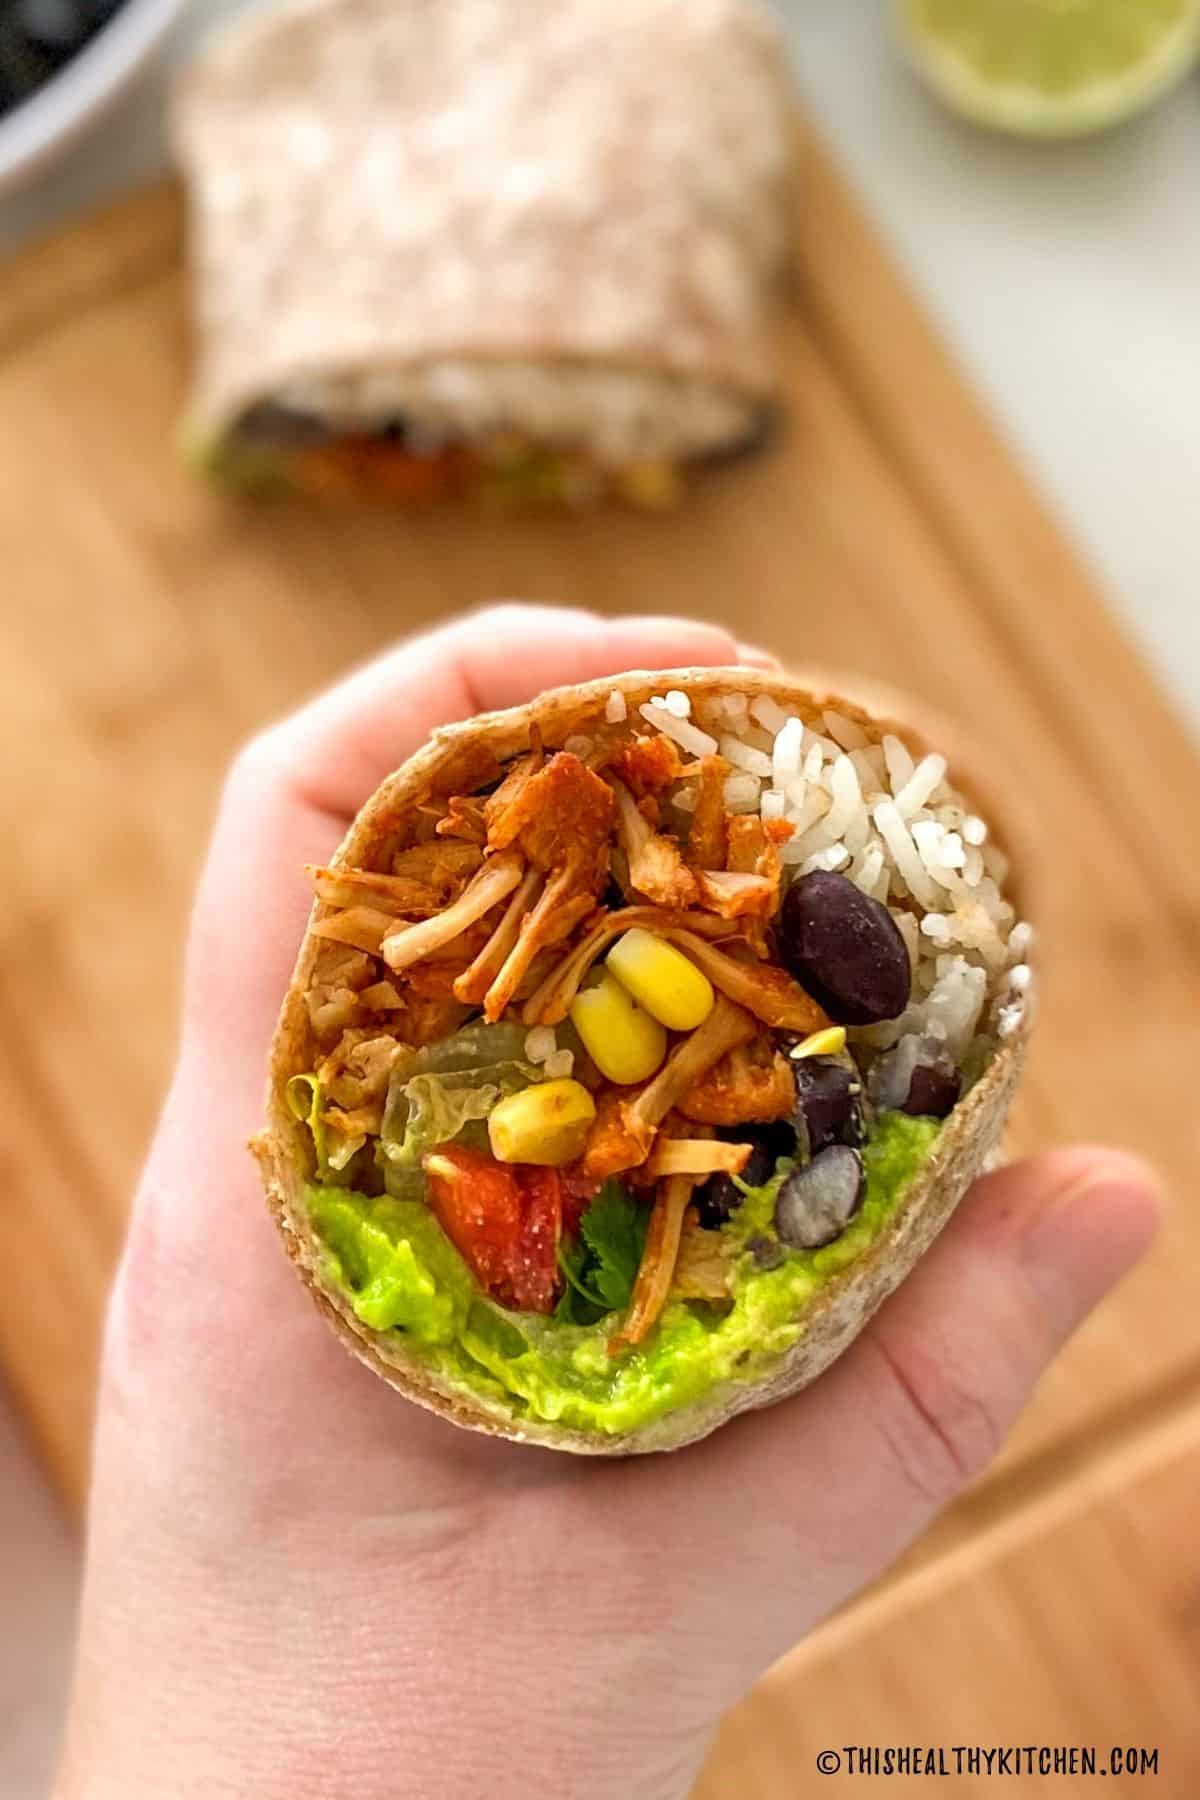 Hand holding up a vegan burrito that's been cut in half with remaining half on cutting board below.